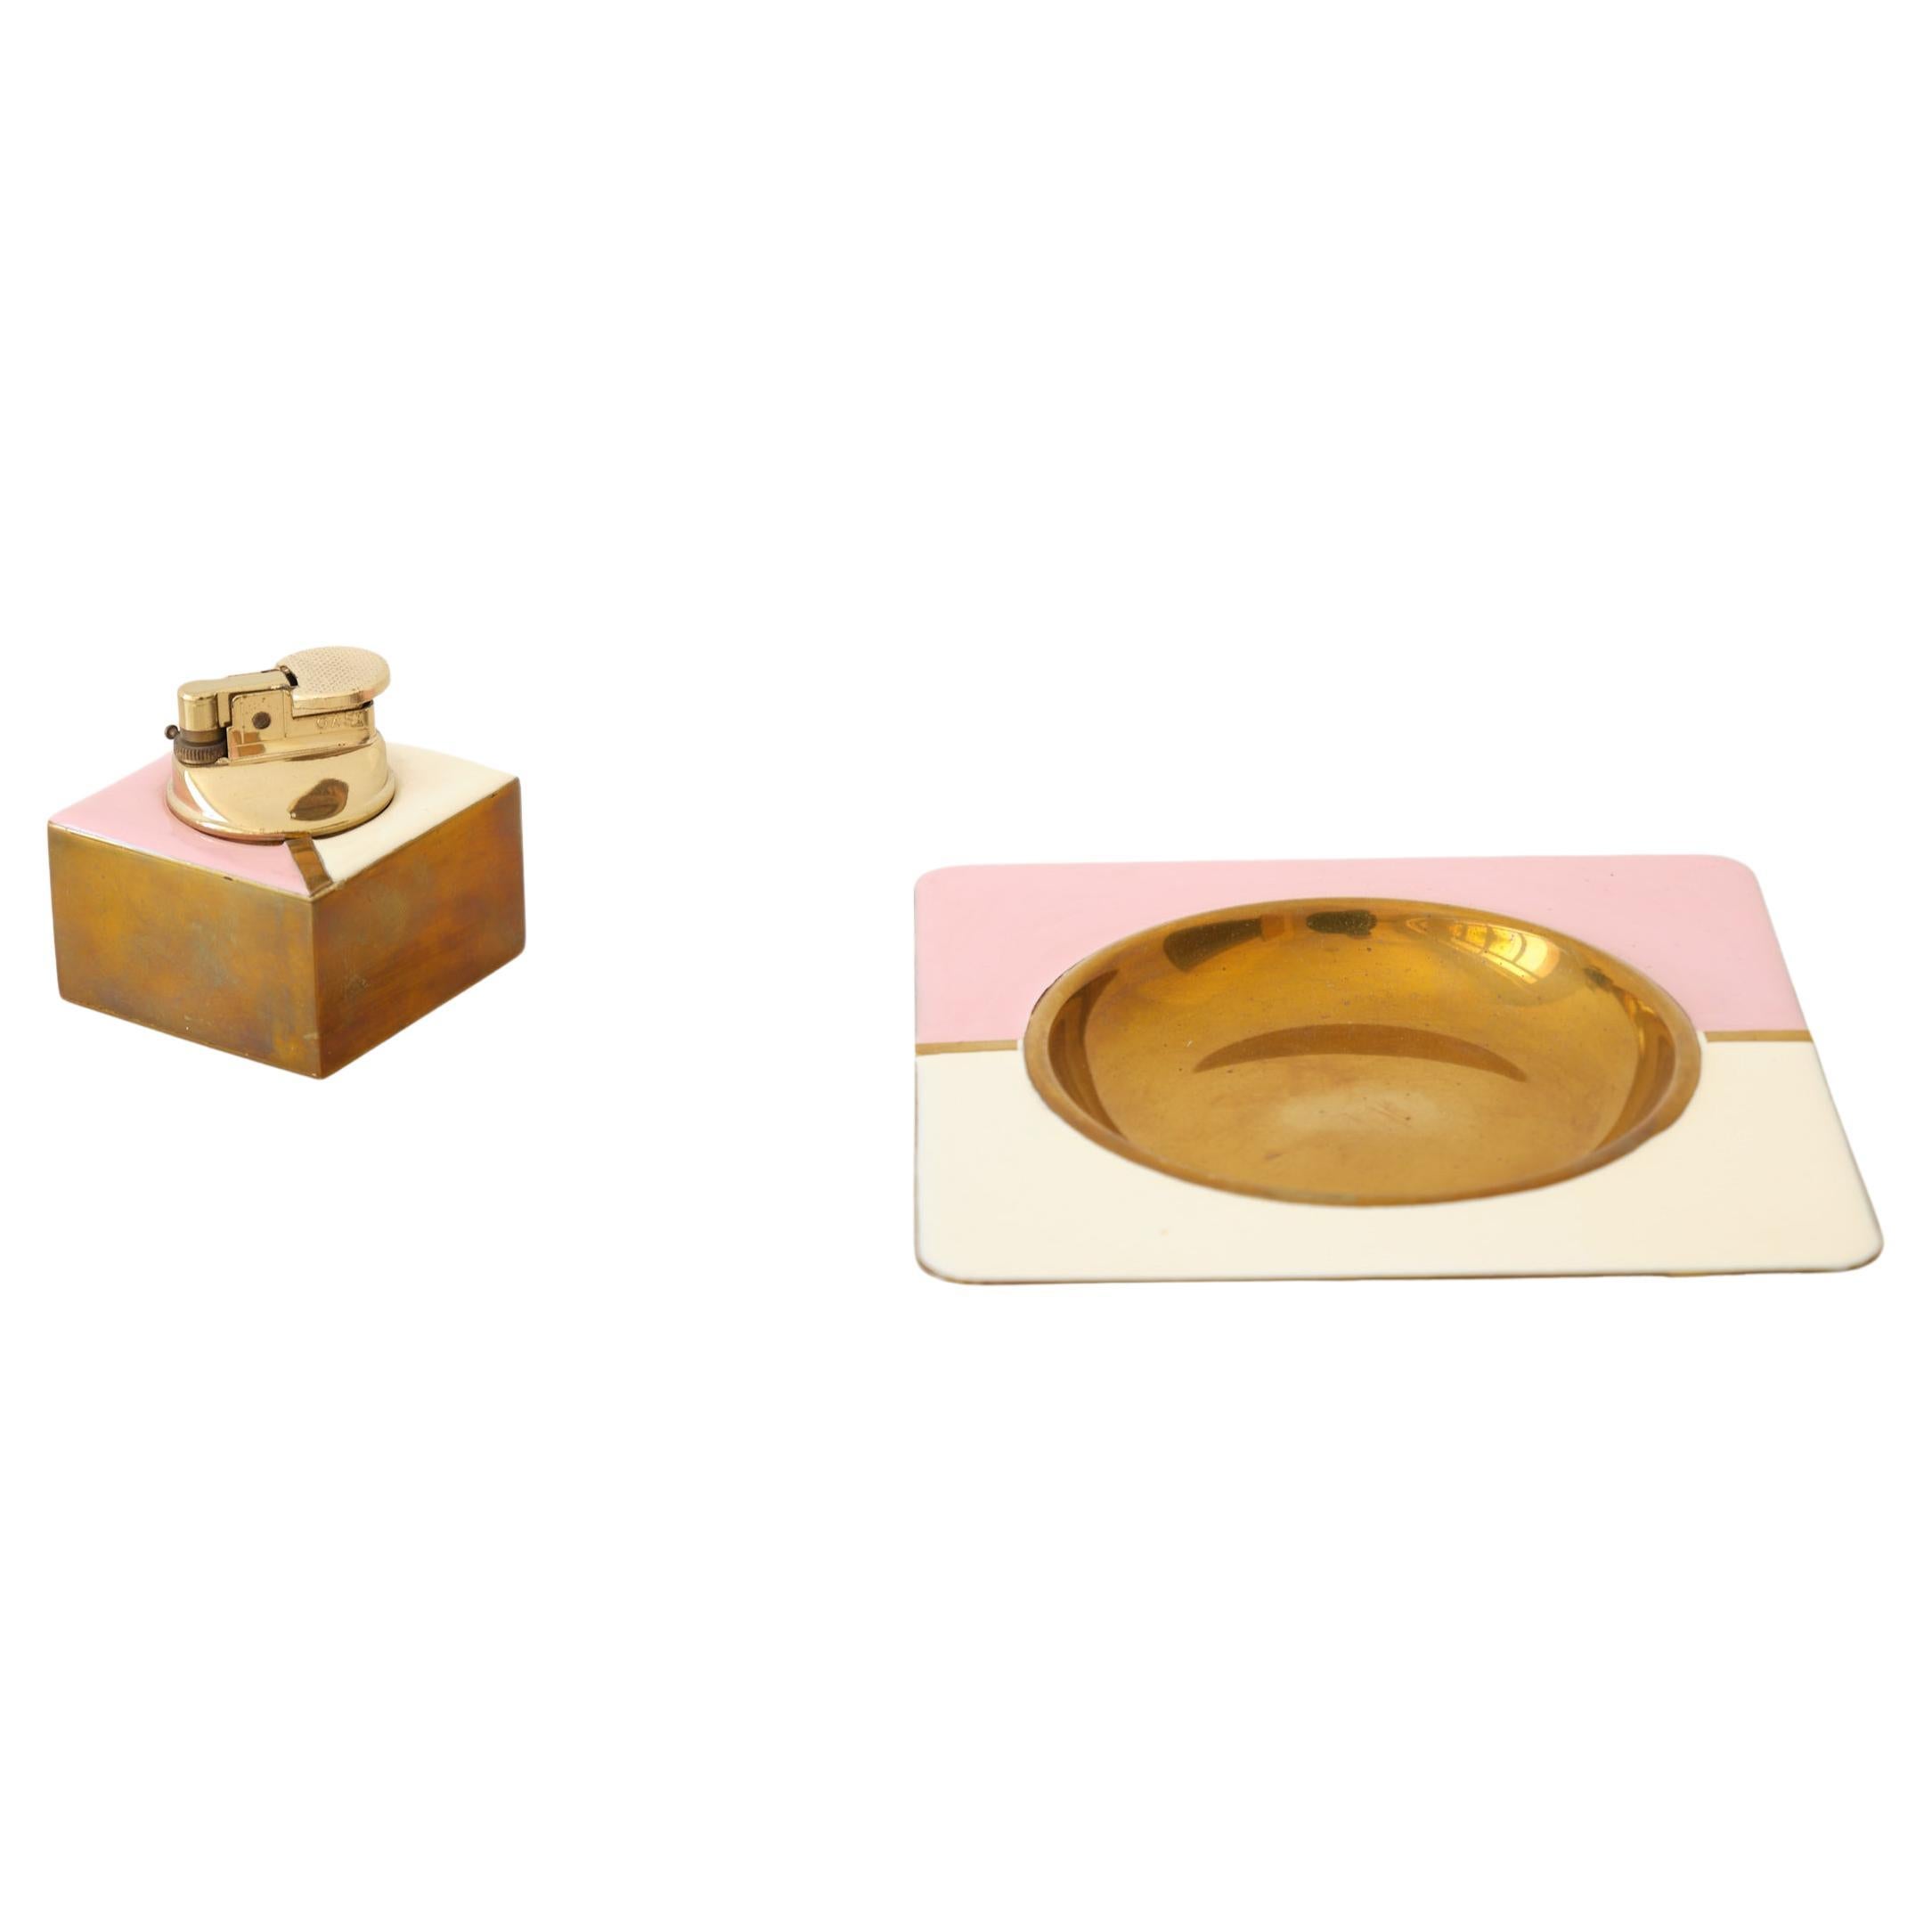 Vintage Italian Set of Ashtray and Lighter in Bras, Mid-Century from the 1960s For Sale